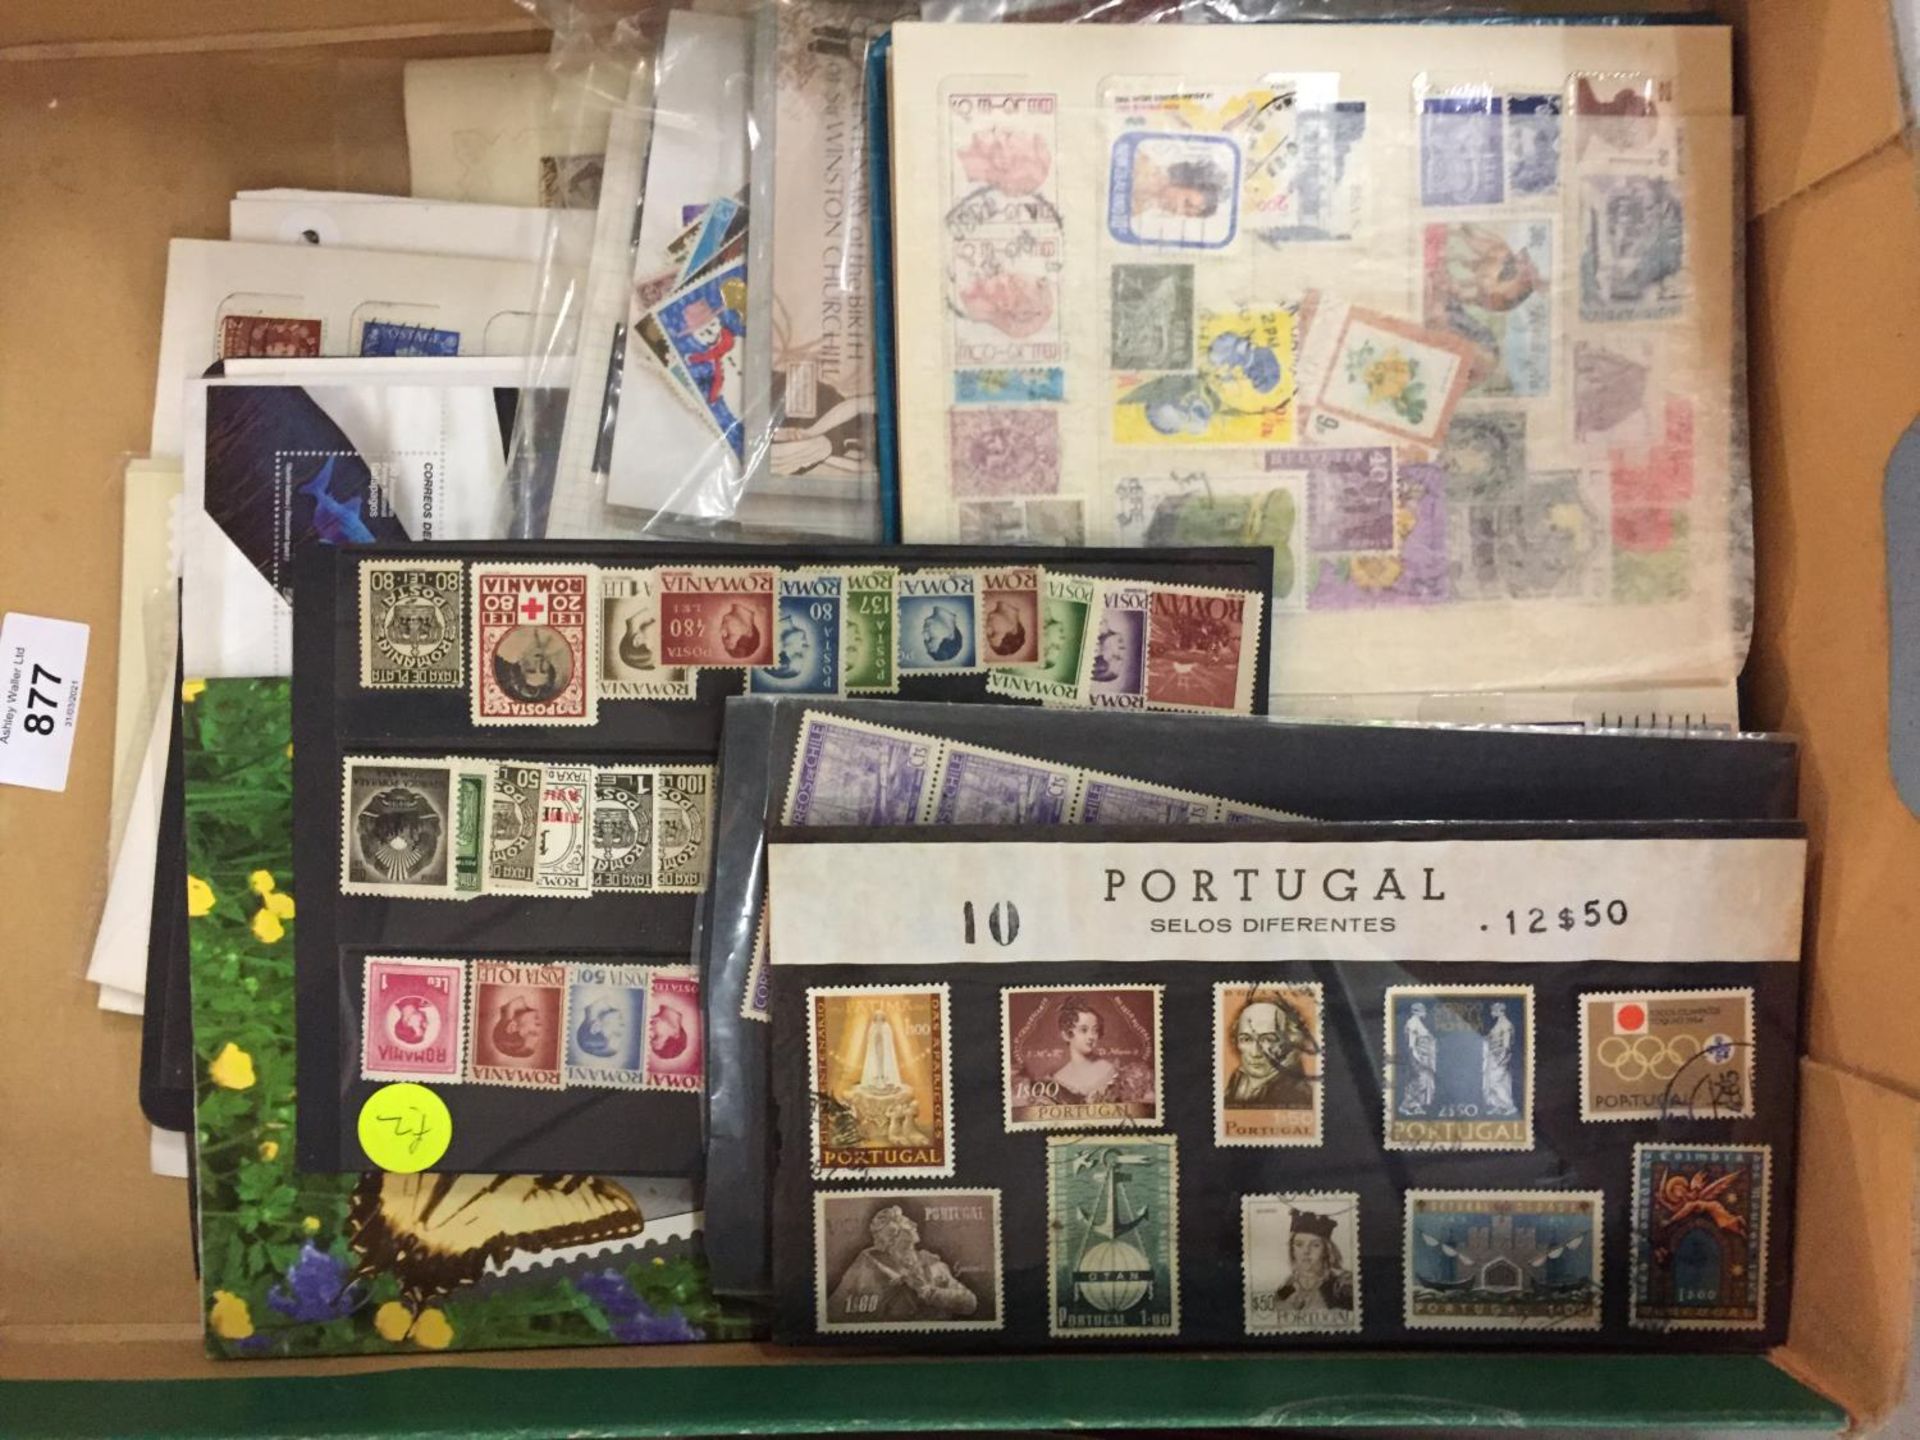 A COLLECTION OF VARIOUS STAMPS, CIGARETTE CARDS AND GERMAN BANK NOTES - Image 2 of 6